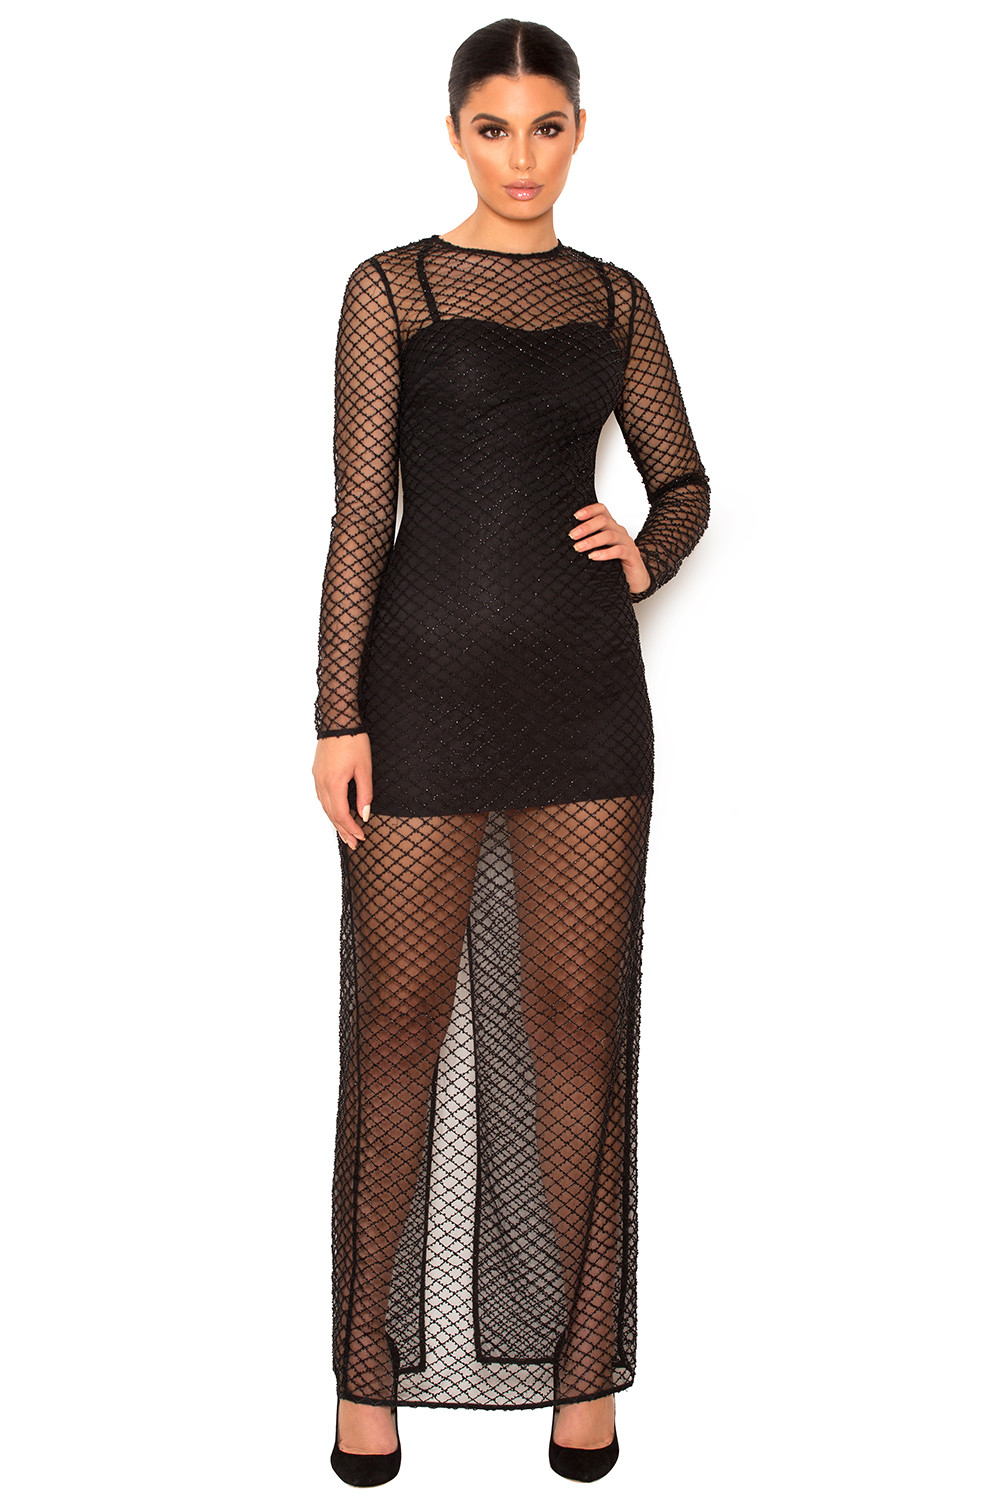 'Nyla' Black Crystal Encrusted Fishnet Maxi Dress with Under Garments - Limited Edition - SALE